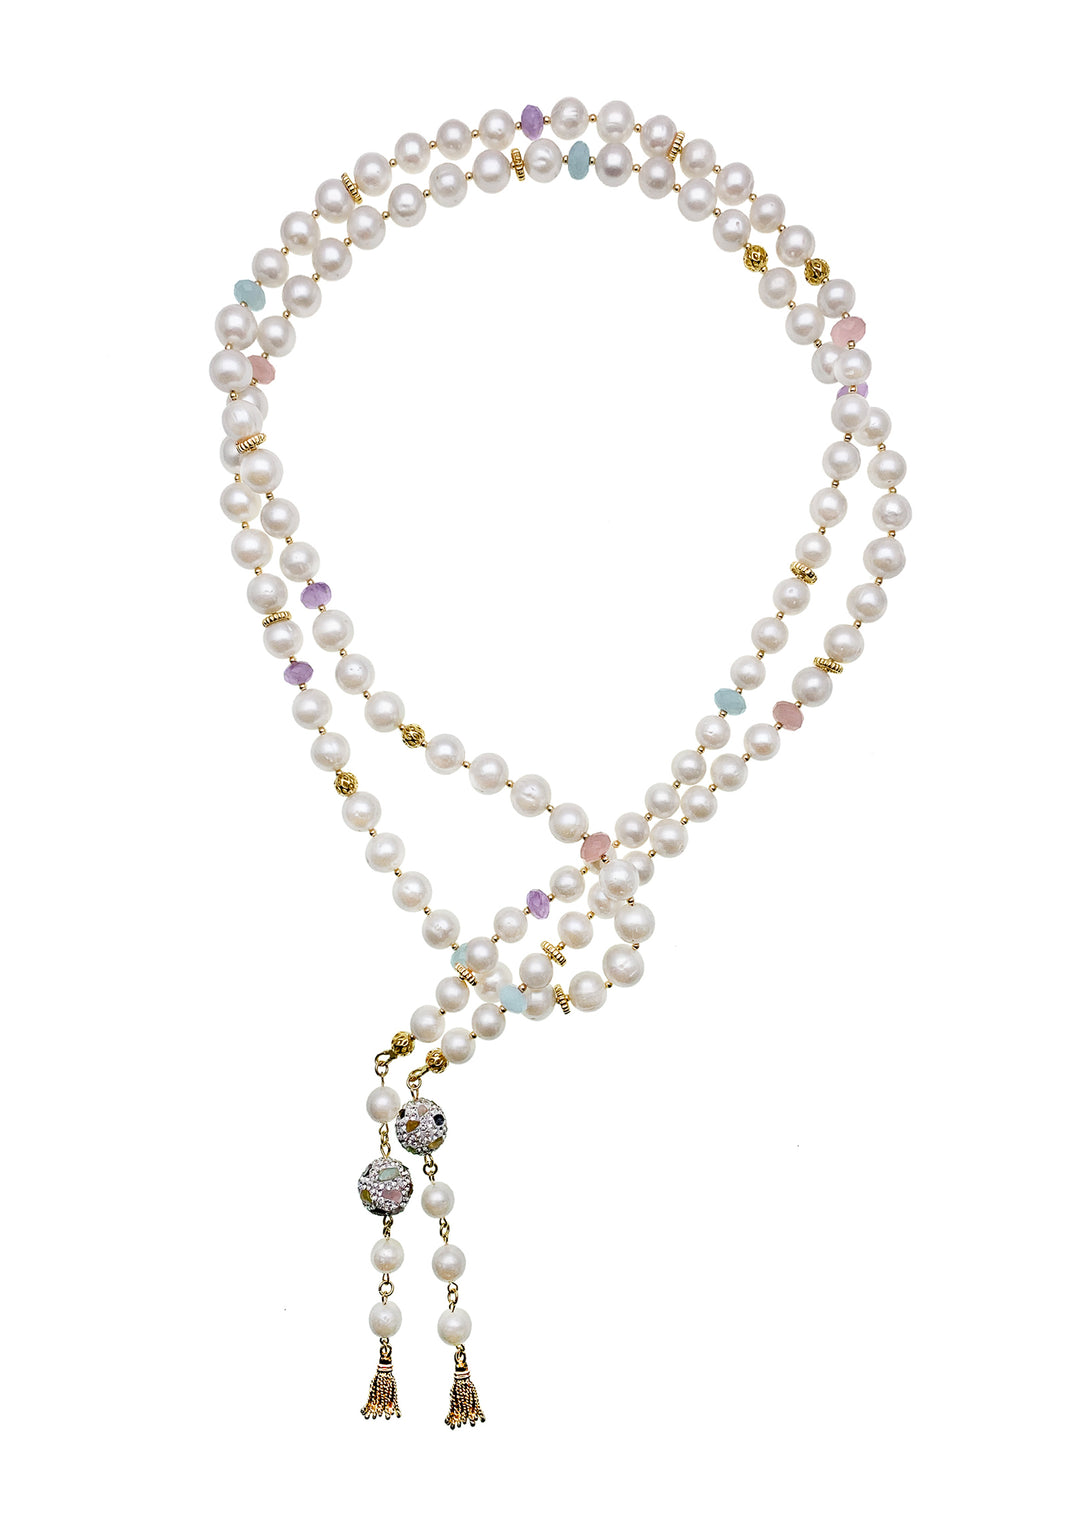 Freshwater Pearls With Rhinestones Open Ended Long Necklace EN022 - FARRA